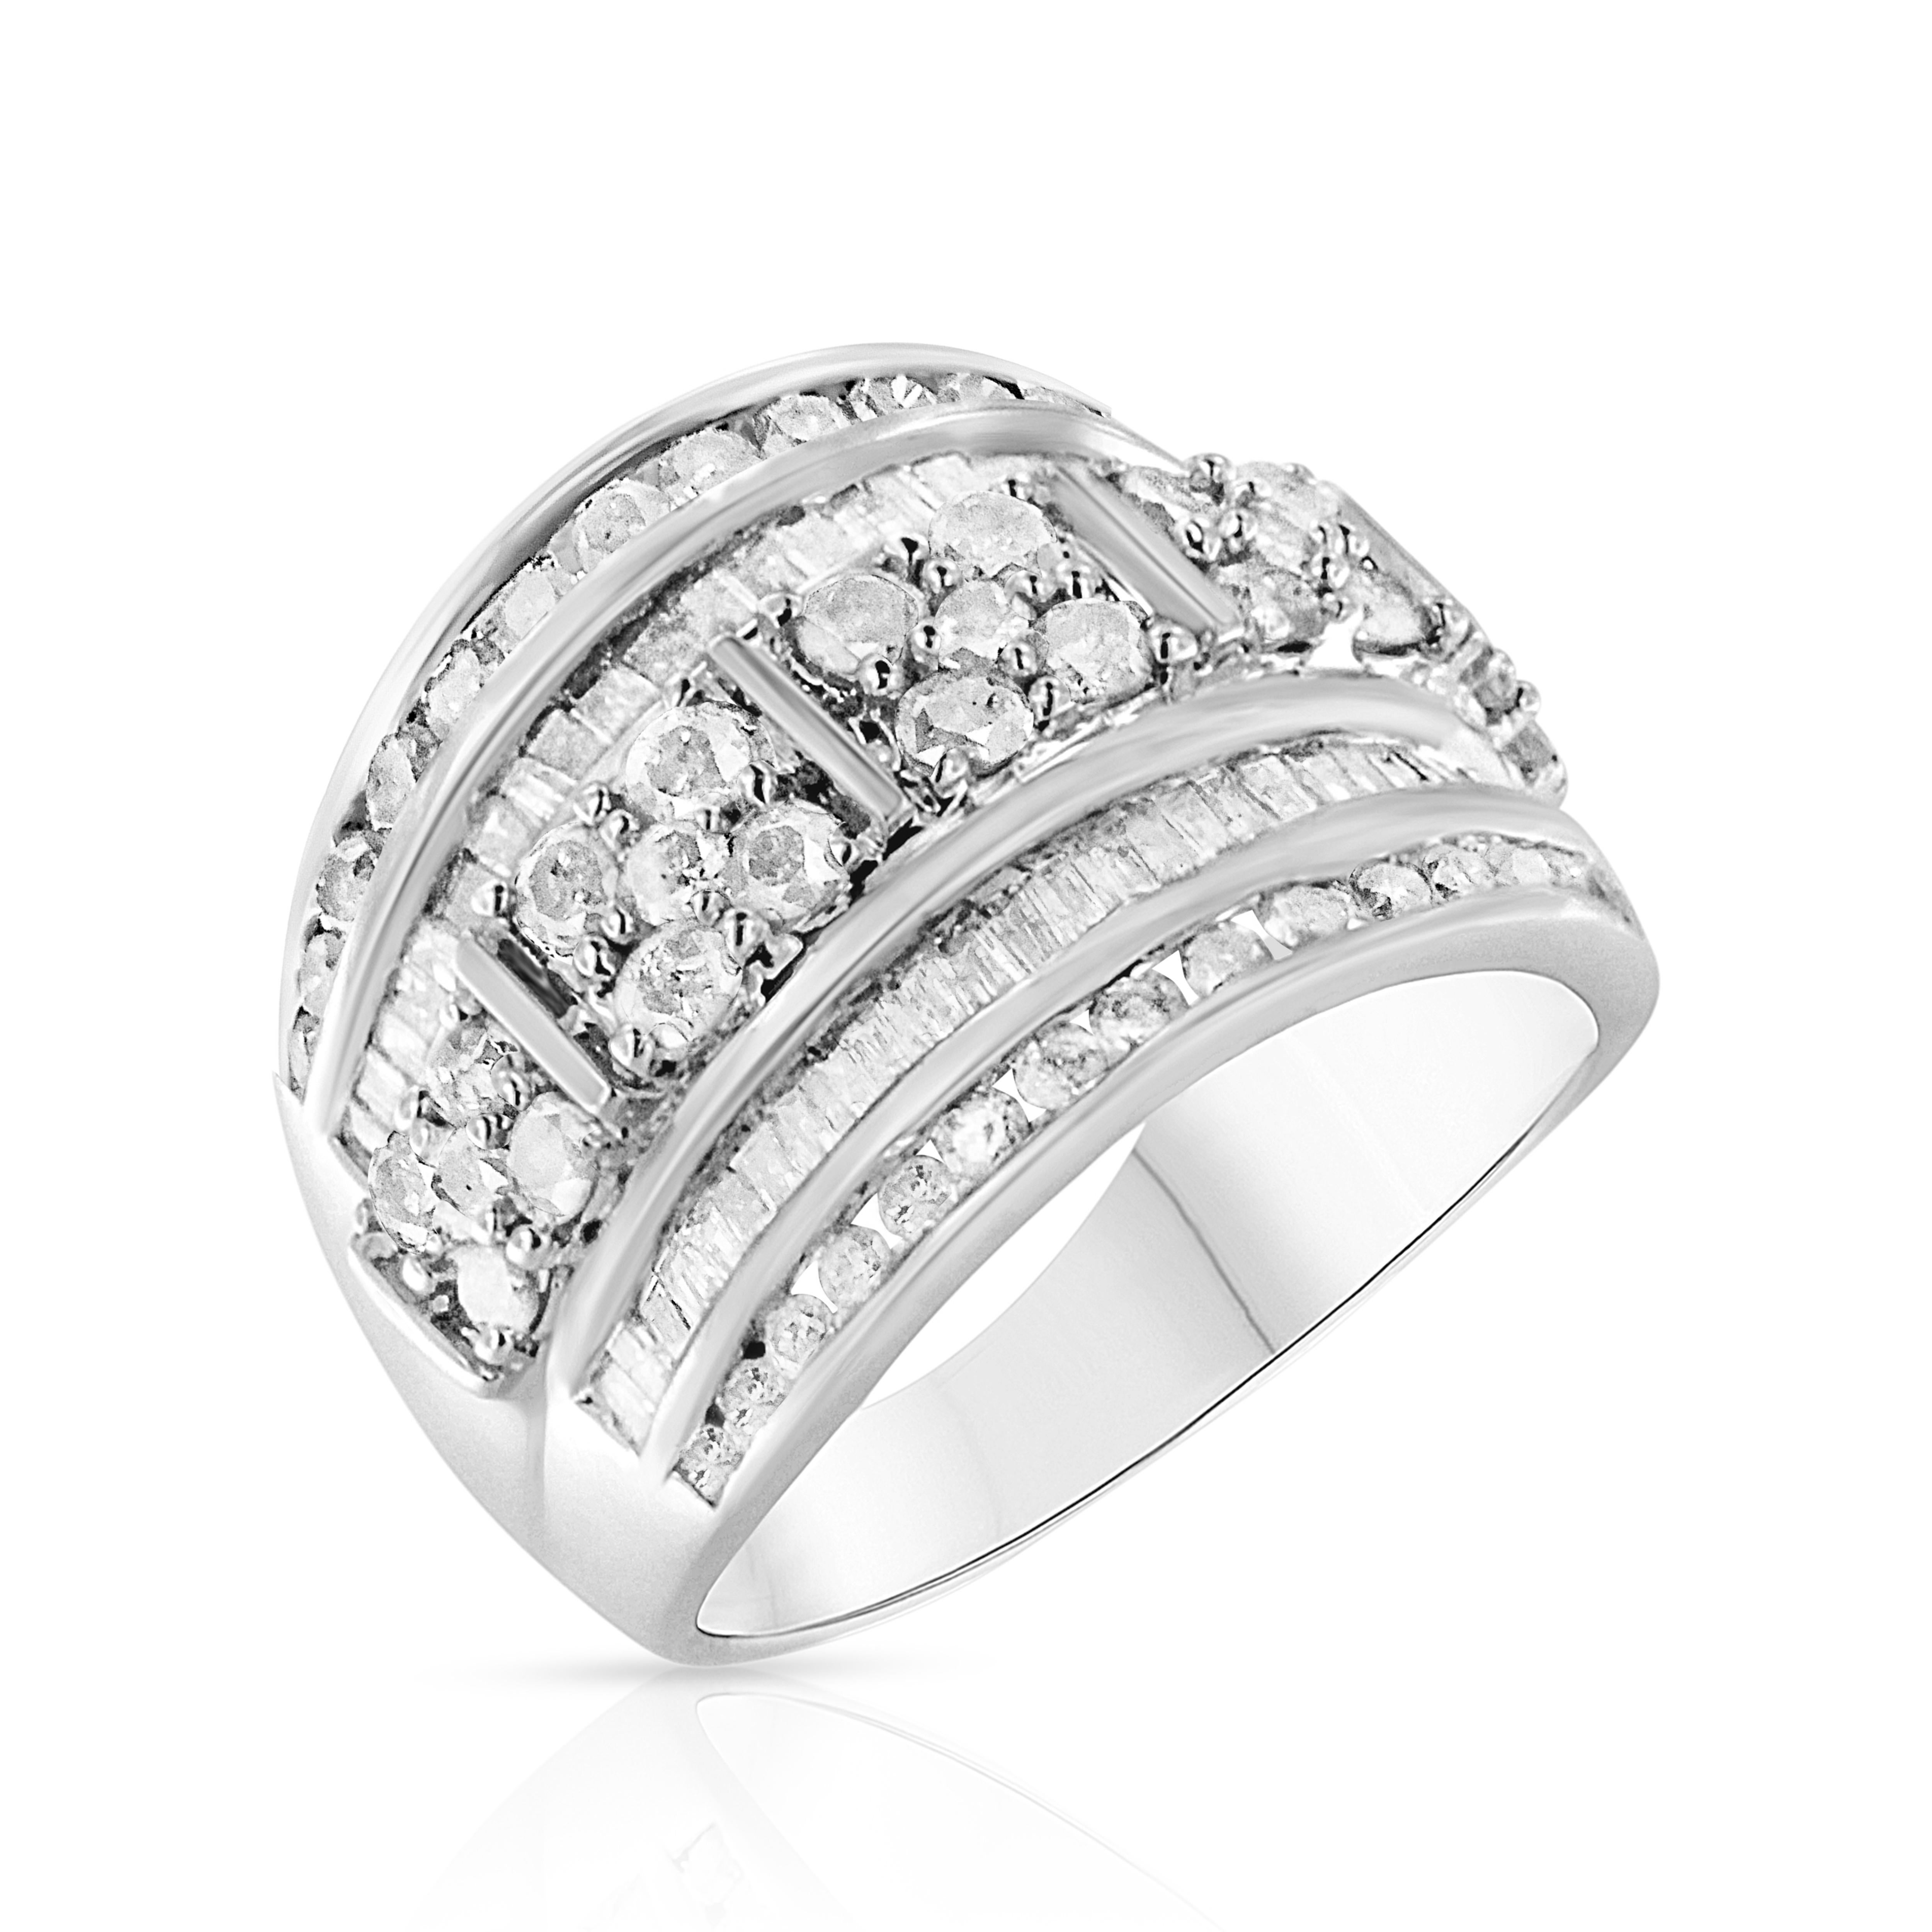 For Sale:  .925 Sterling Silver 2.0 Carat Diamond Multi-Row Tapered Cocktail Fashion Ring 2